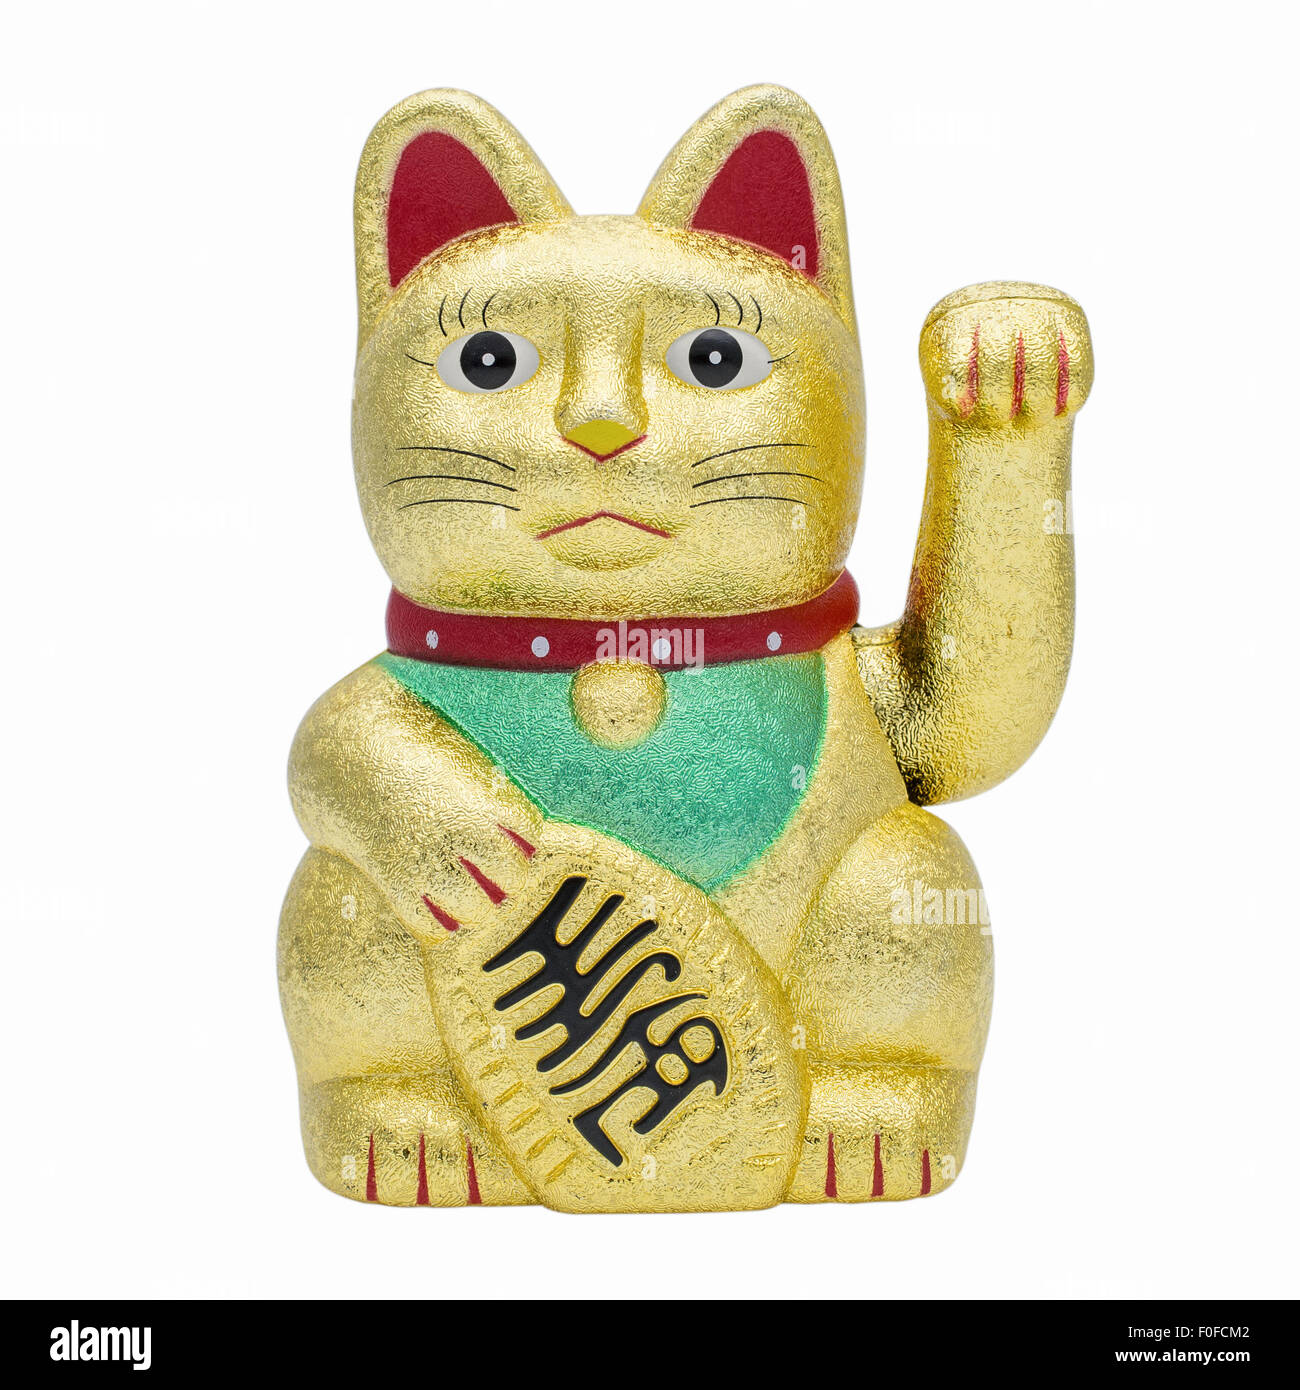 Isolated fortune or lucky cat with clipping path in jpg. Stock Photo